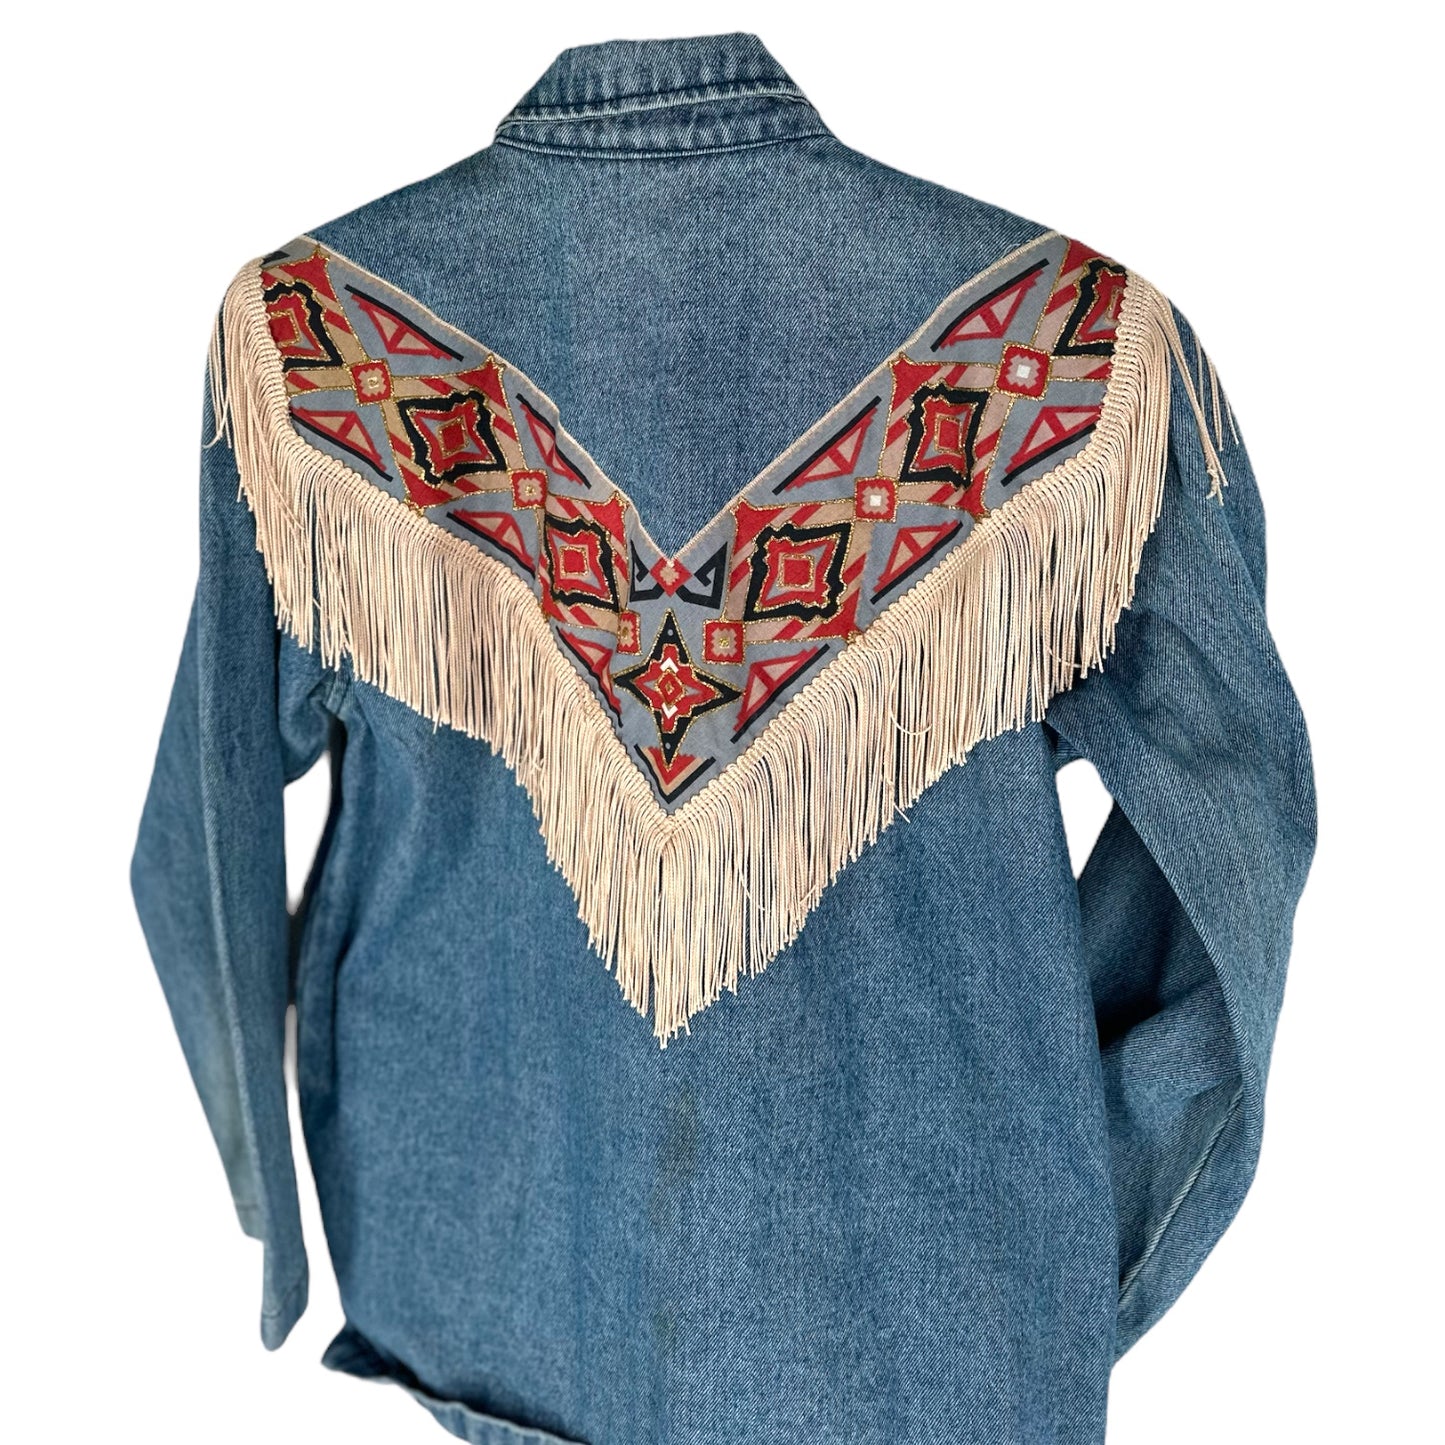 Decorated Jean Jacket